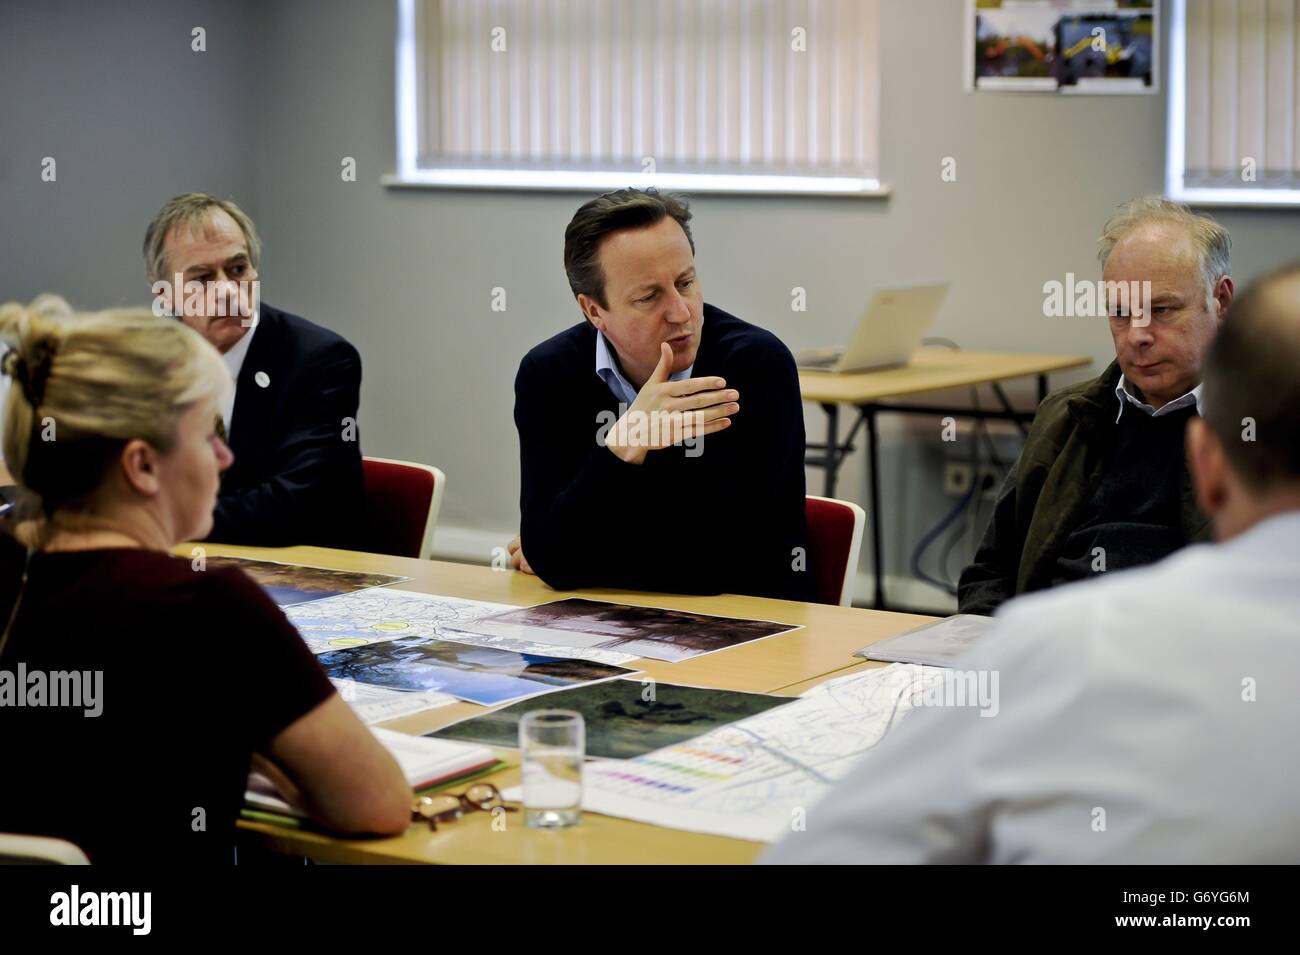 Prime Minister David Cameron meets with members of the blue-light services and MP's from Sedgemoor District Council at Bridgewater, Somerset, where they are discussing the repair, recovery and prevention of flooding. Stock Photo